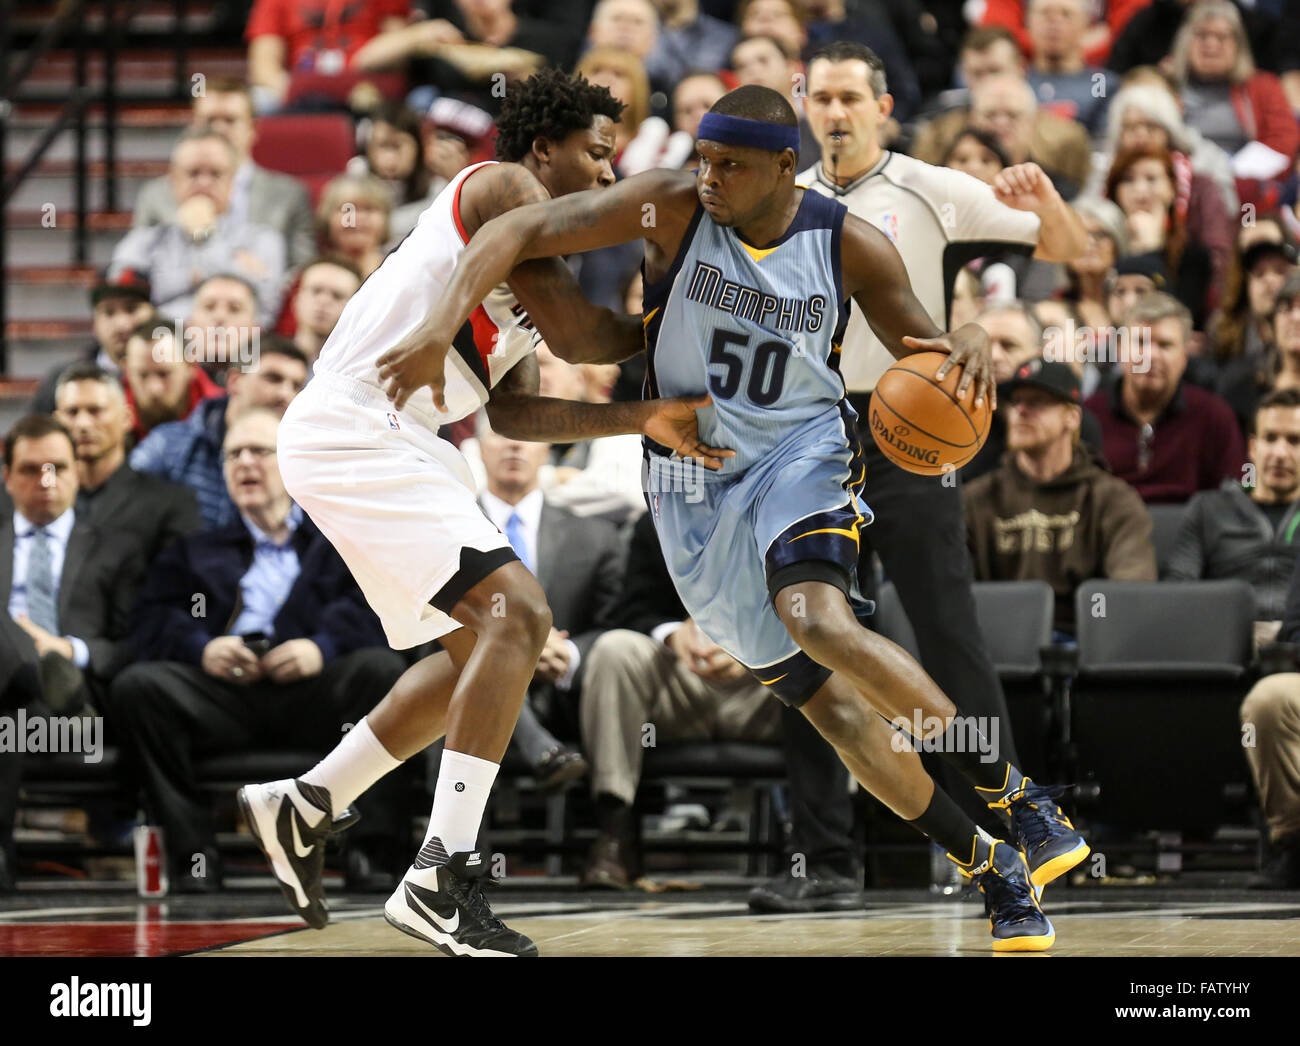 Portland, Oregon, USA. 4th January, 2016. ZACH RANDOLPH (50) drives to the hoop. The Portland Trail Blazers hosted the Memphis Grizzlies at the Moda Center in Portland, OR, on Janurary 4th 2016. Photo by David Blair Credit:  David Blair/ZUMA Wire/Alamy Live News Stock Photo